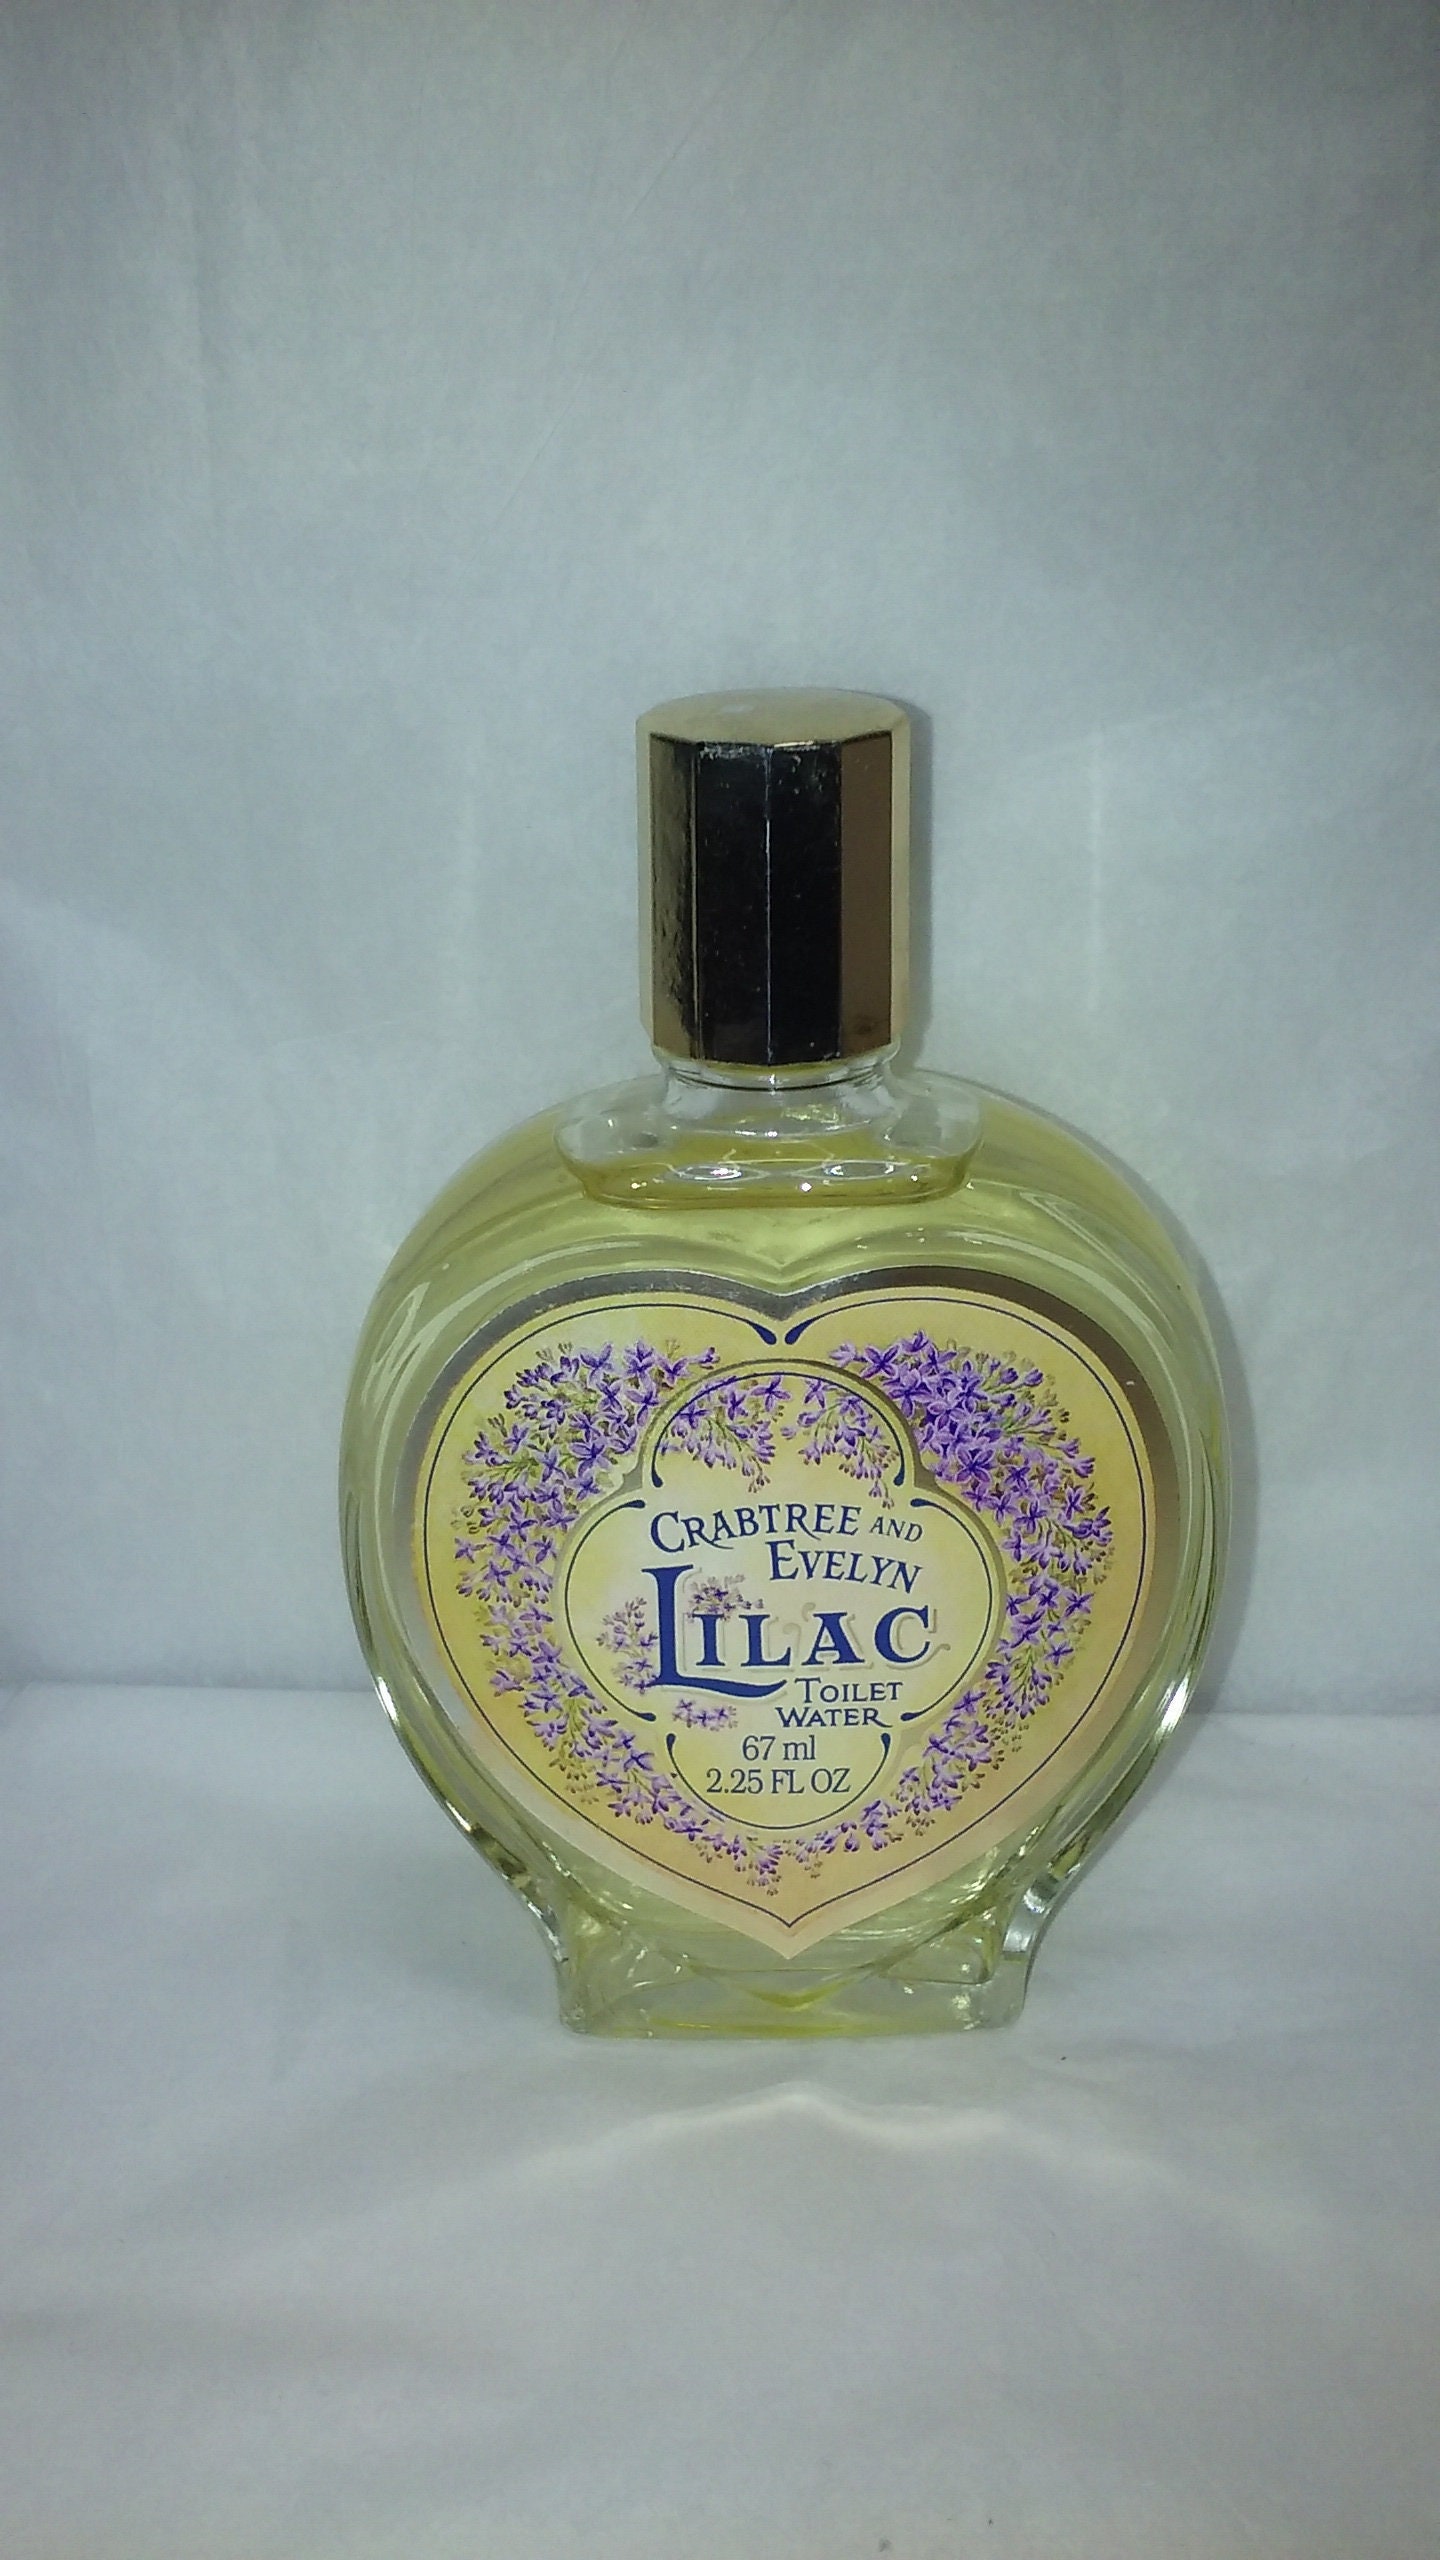 Crabtree Evelyn Lilac Lilas Eau Floral Water 2, 25 Oz von Etsy - somersetantiques1